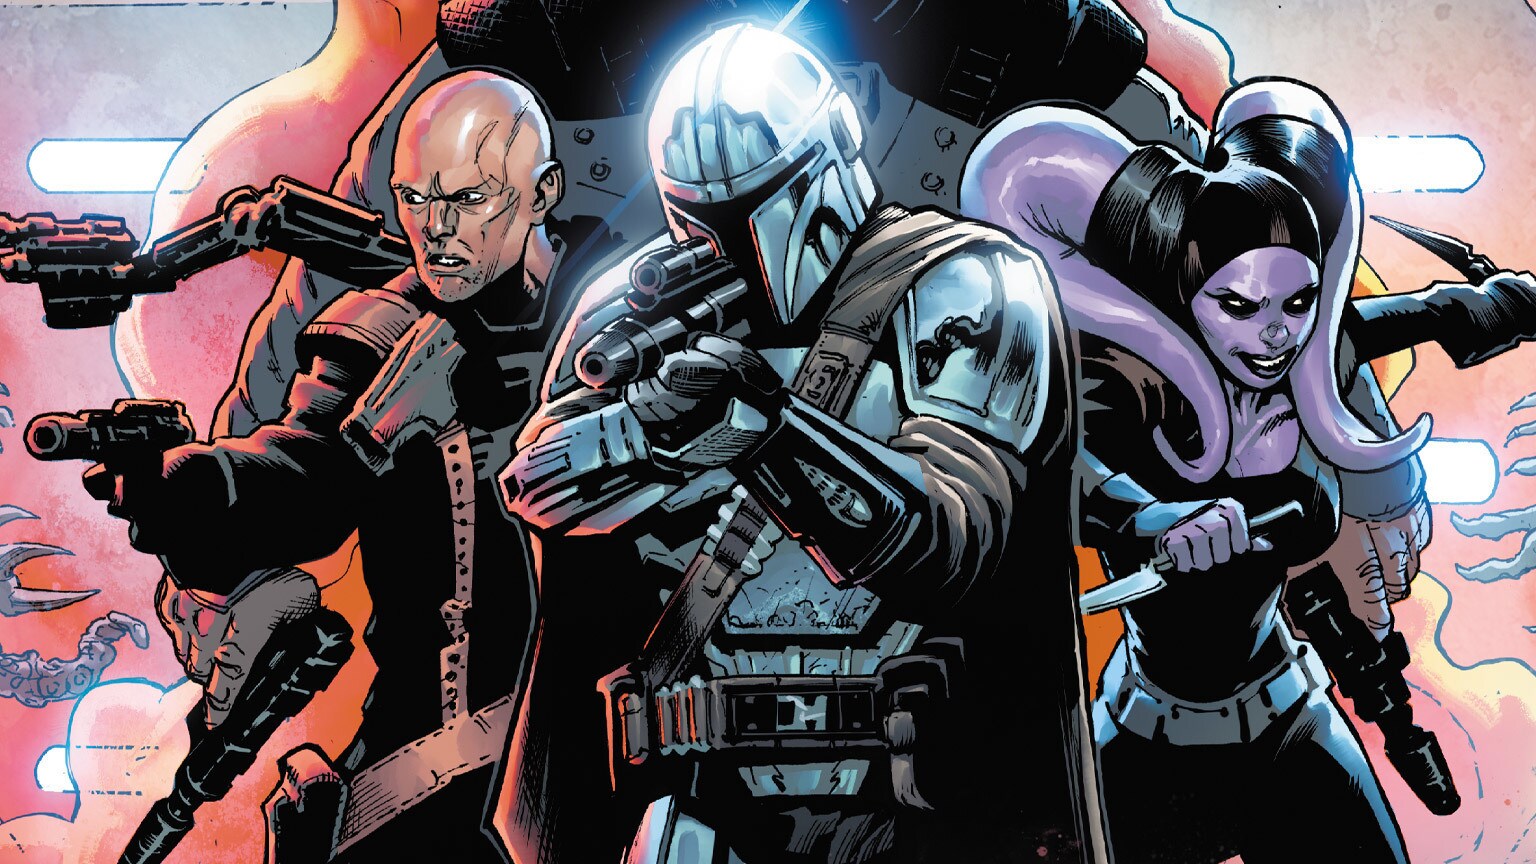 Migs Mayfeld Prepares for a Prison Sting in Marvel’s Star Wars: The Mandalorian #6 – Exclusive Preview